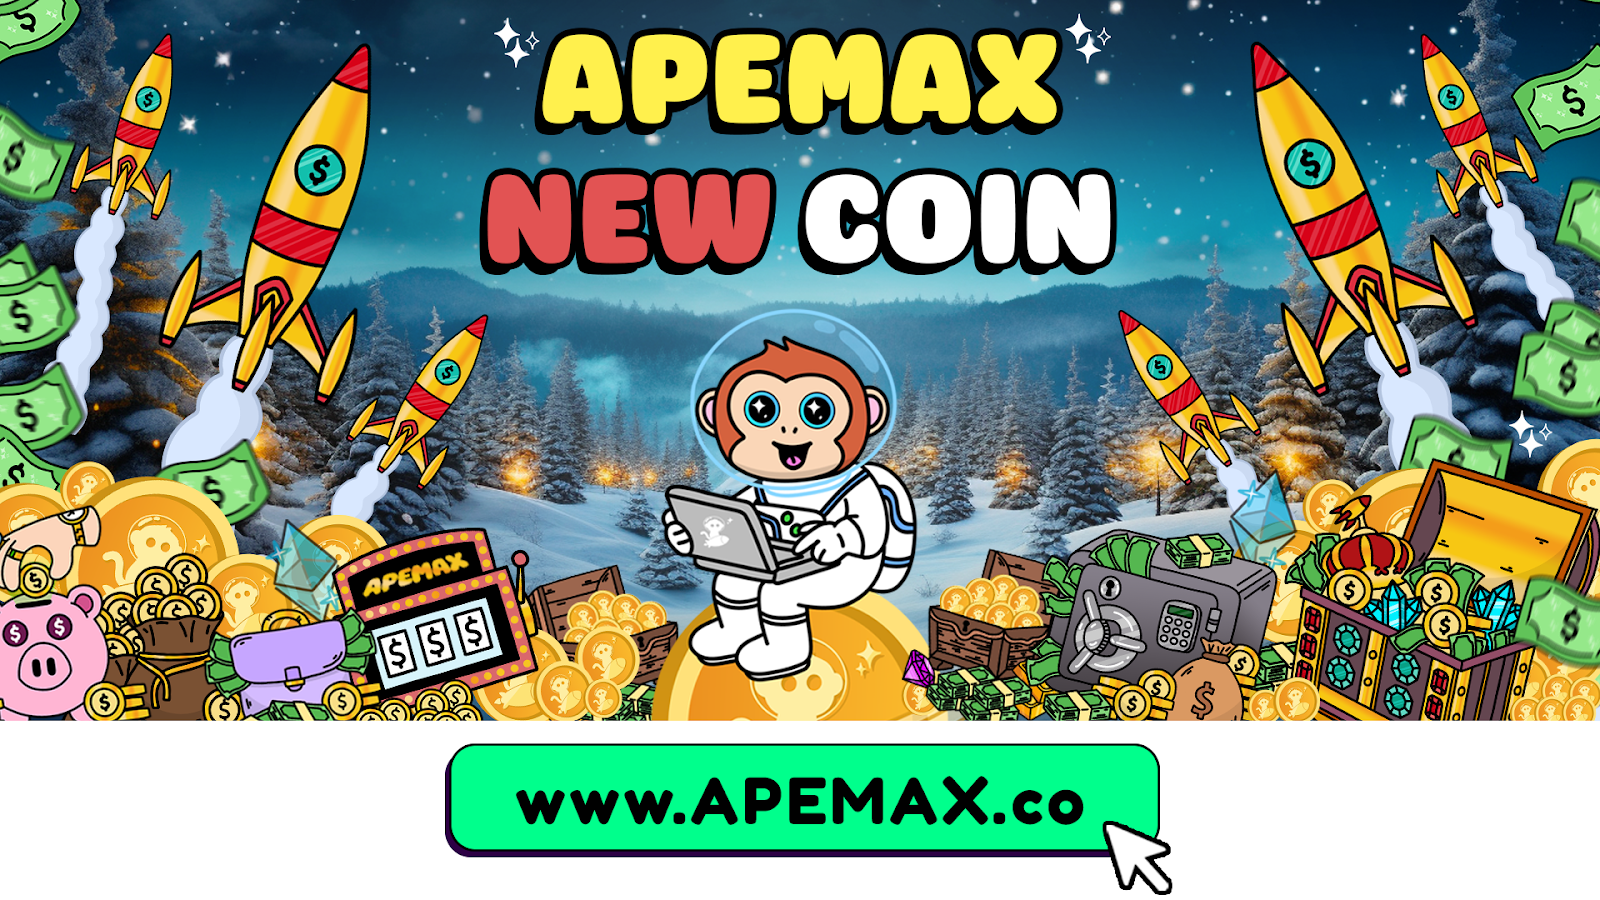 Top Altcoins like ApeMax that are not Bitcoin